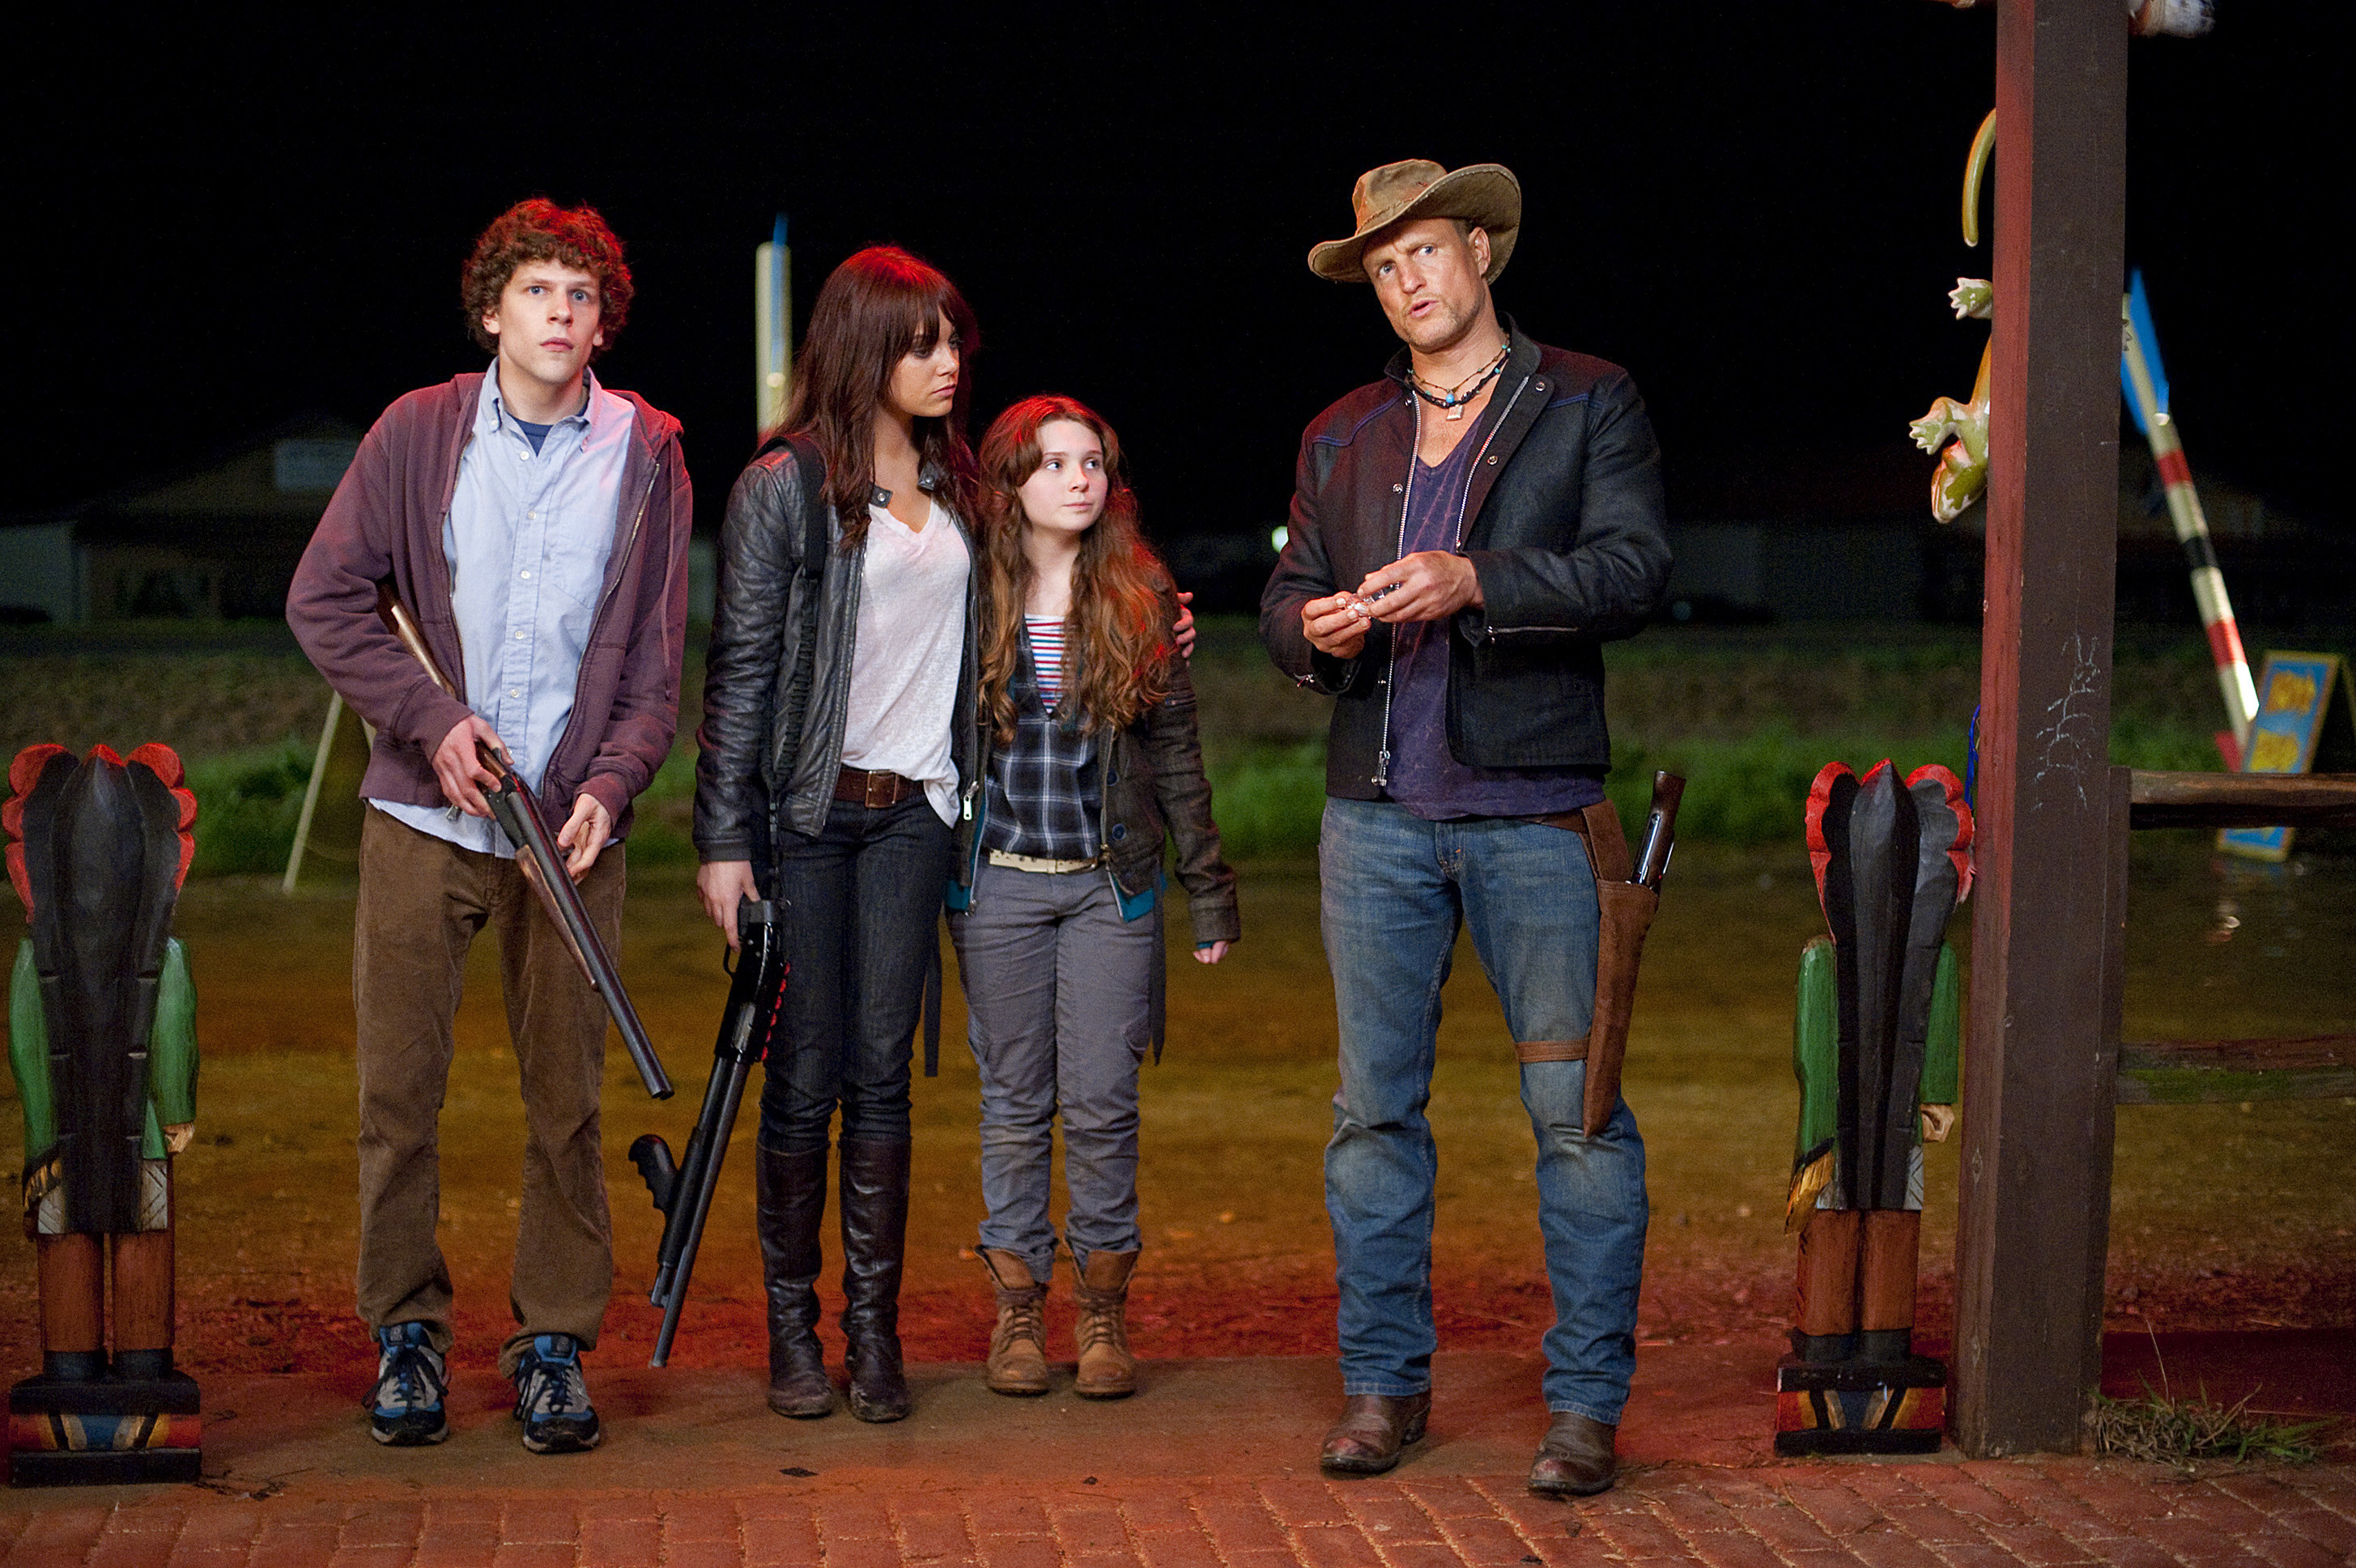 group of people preparing for zombieland outside while communicating with each other